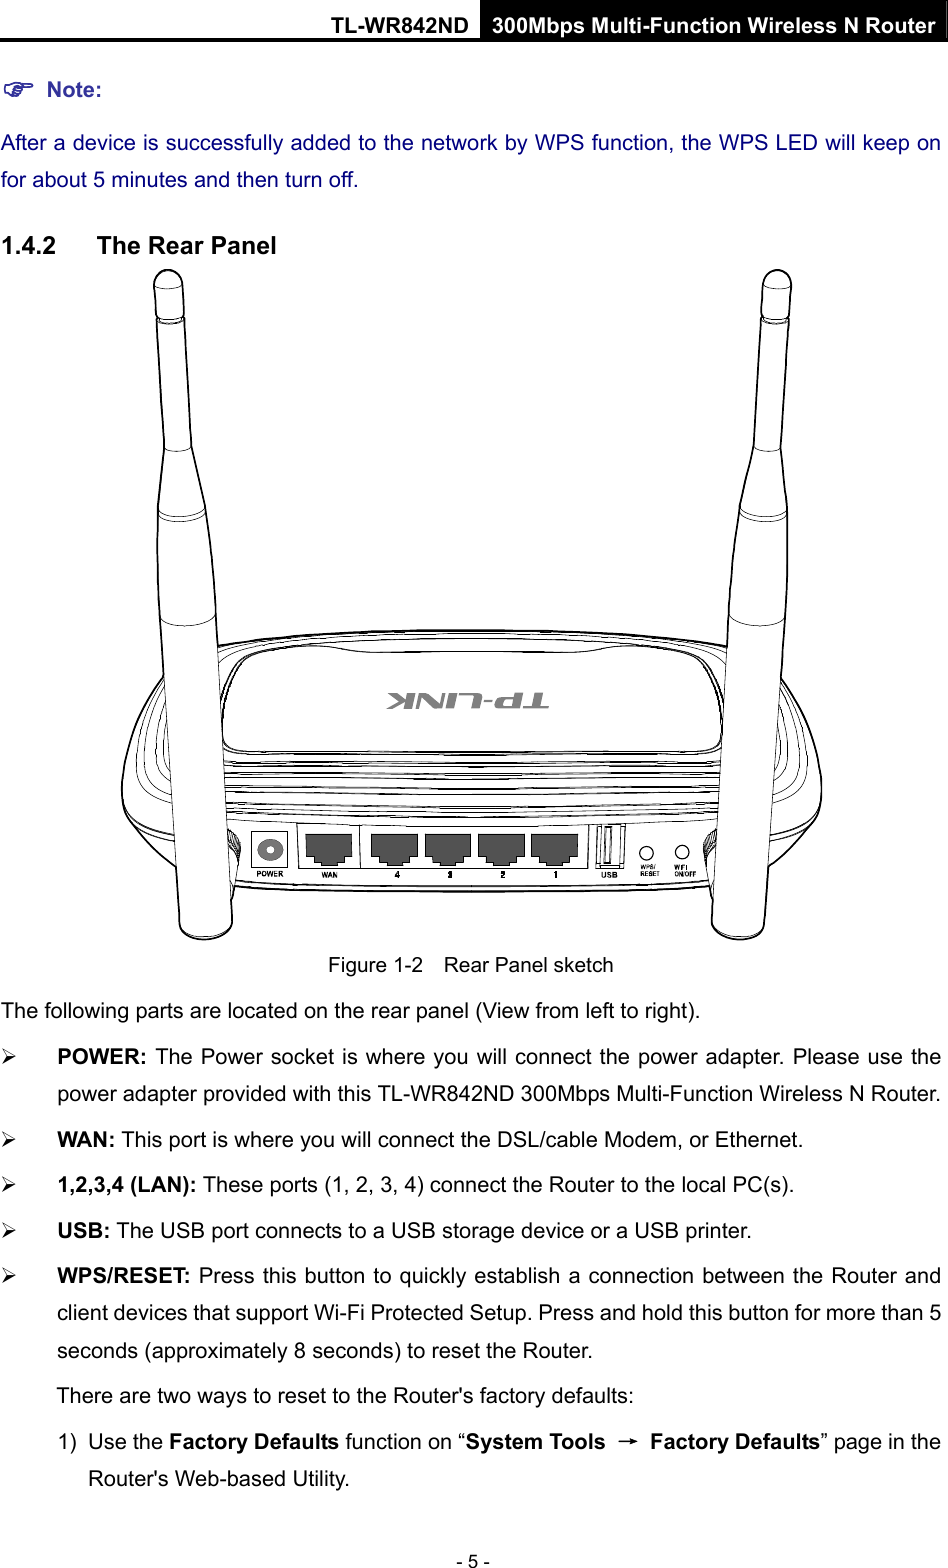 TL-WR842ND 300Mbps Multi-Function Wireless N Router - 5 - ) Note: After a device is successfully added to the network by WPS function, the WPS LED will keep on for about 5 minutes and then turn off.   1.4.2  The Rear Panel  Figure 1-2    Rear Panel sketch The following parts are located on the rear panel (View from left to right). ¾ POWER: The Power socket is where you will connect the power adapter. Please use the power adapter provided with this TL-WR842ND 300Mbps Multi-Function Wireless N Router. ¾ WAN: This port is where you will connect the DSL/cable Modem, or Ethernet. ¾ 1,2,3,4 (LAN): These ports (1, 2, 3, 4) connect the Router to the local PC(s). ¾ USB: The USB port connects to a USB storage device or a USB printer. ¾ WPS/RESET: Press this button to quickly establish a connection between the Router and client devices that support Wi-Fi Protected Setup. Press and hold this button for more than 5 seconds (approximately 8 seconds) to reset the Router.   There are two ways to reset to the Router&apos;s factory defaults: 1) Use the Factory Defaults function on “System Tools  → Factory Defaults” page in the Router&apos;s Web-based Utility. 